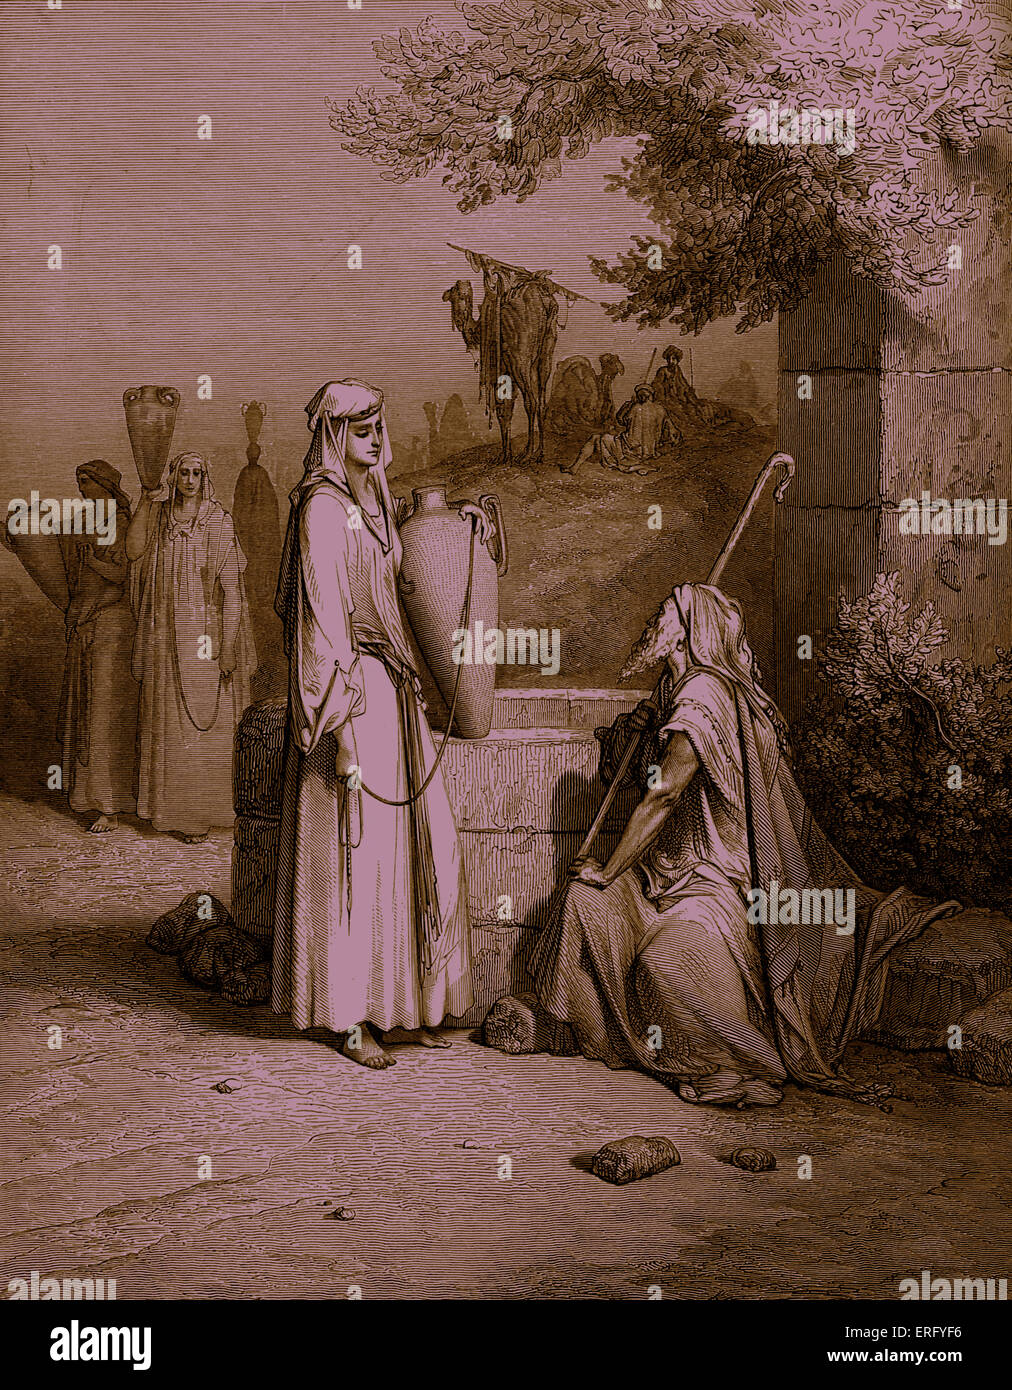 Rebekah meets Abraham 's servant Eliezer at the well outside the city of Nahor. She returns with him to Canaan and marries Stock Photo